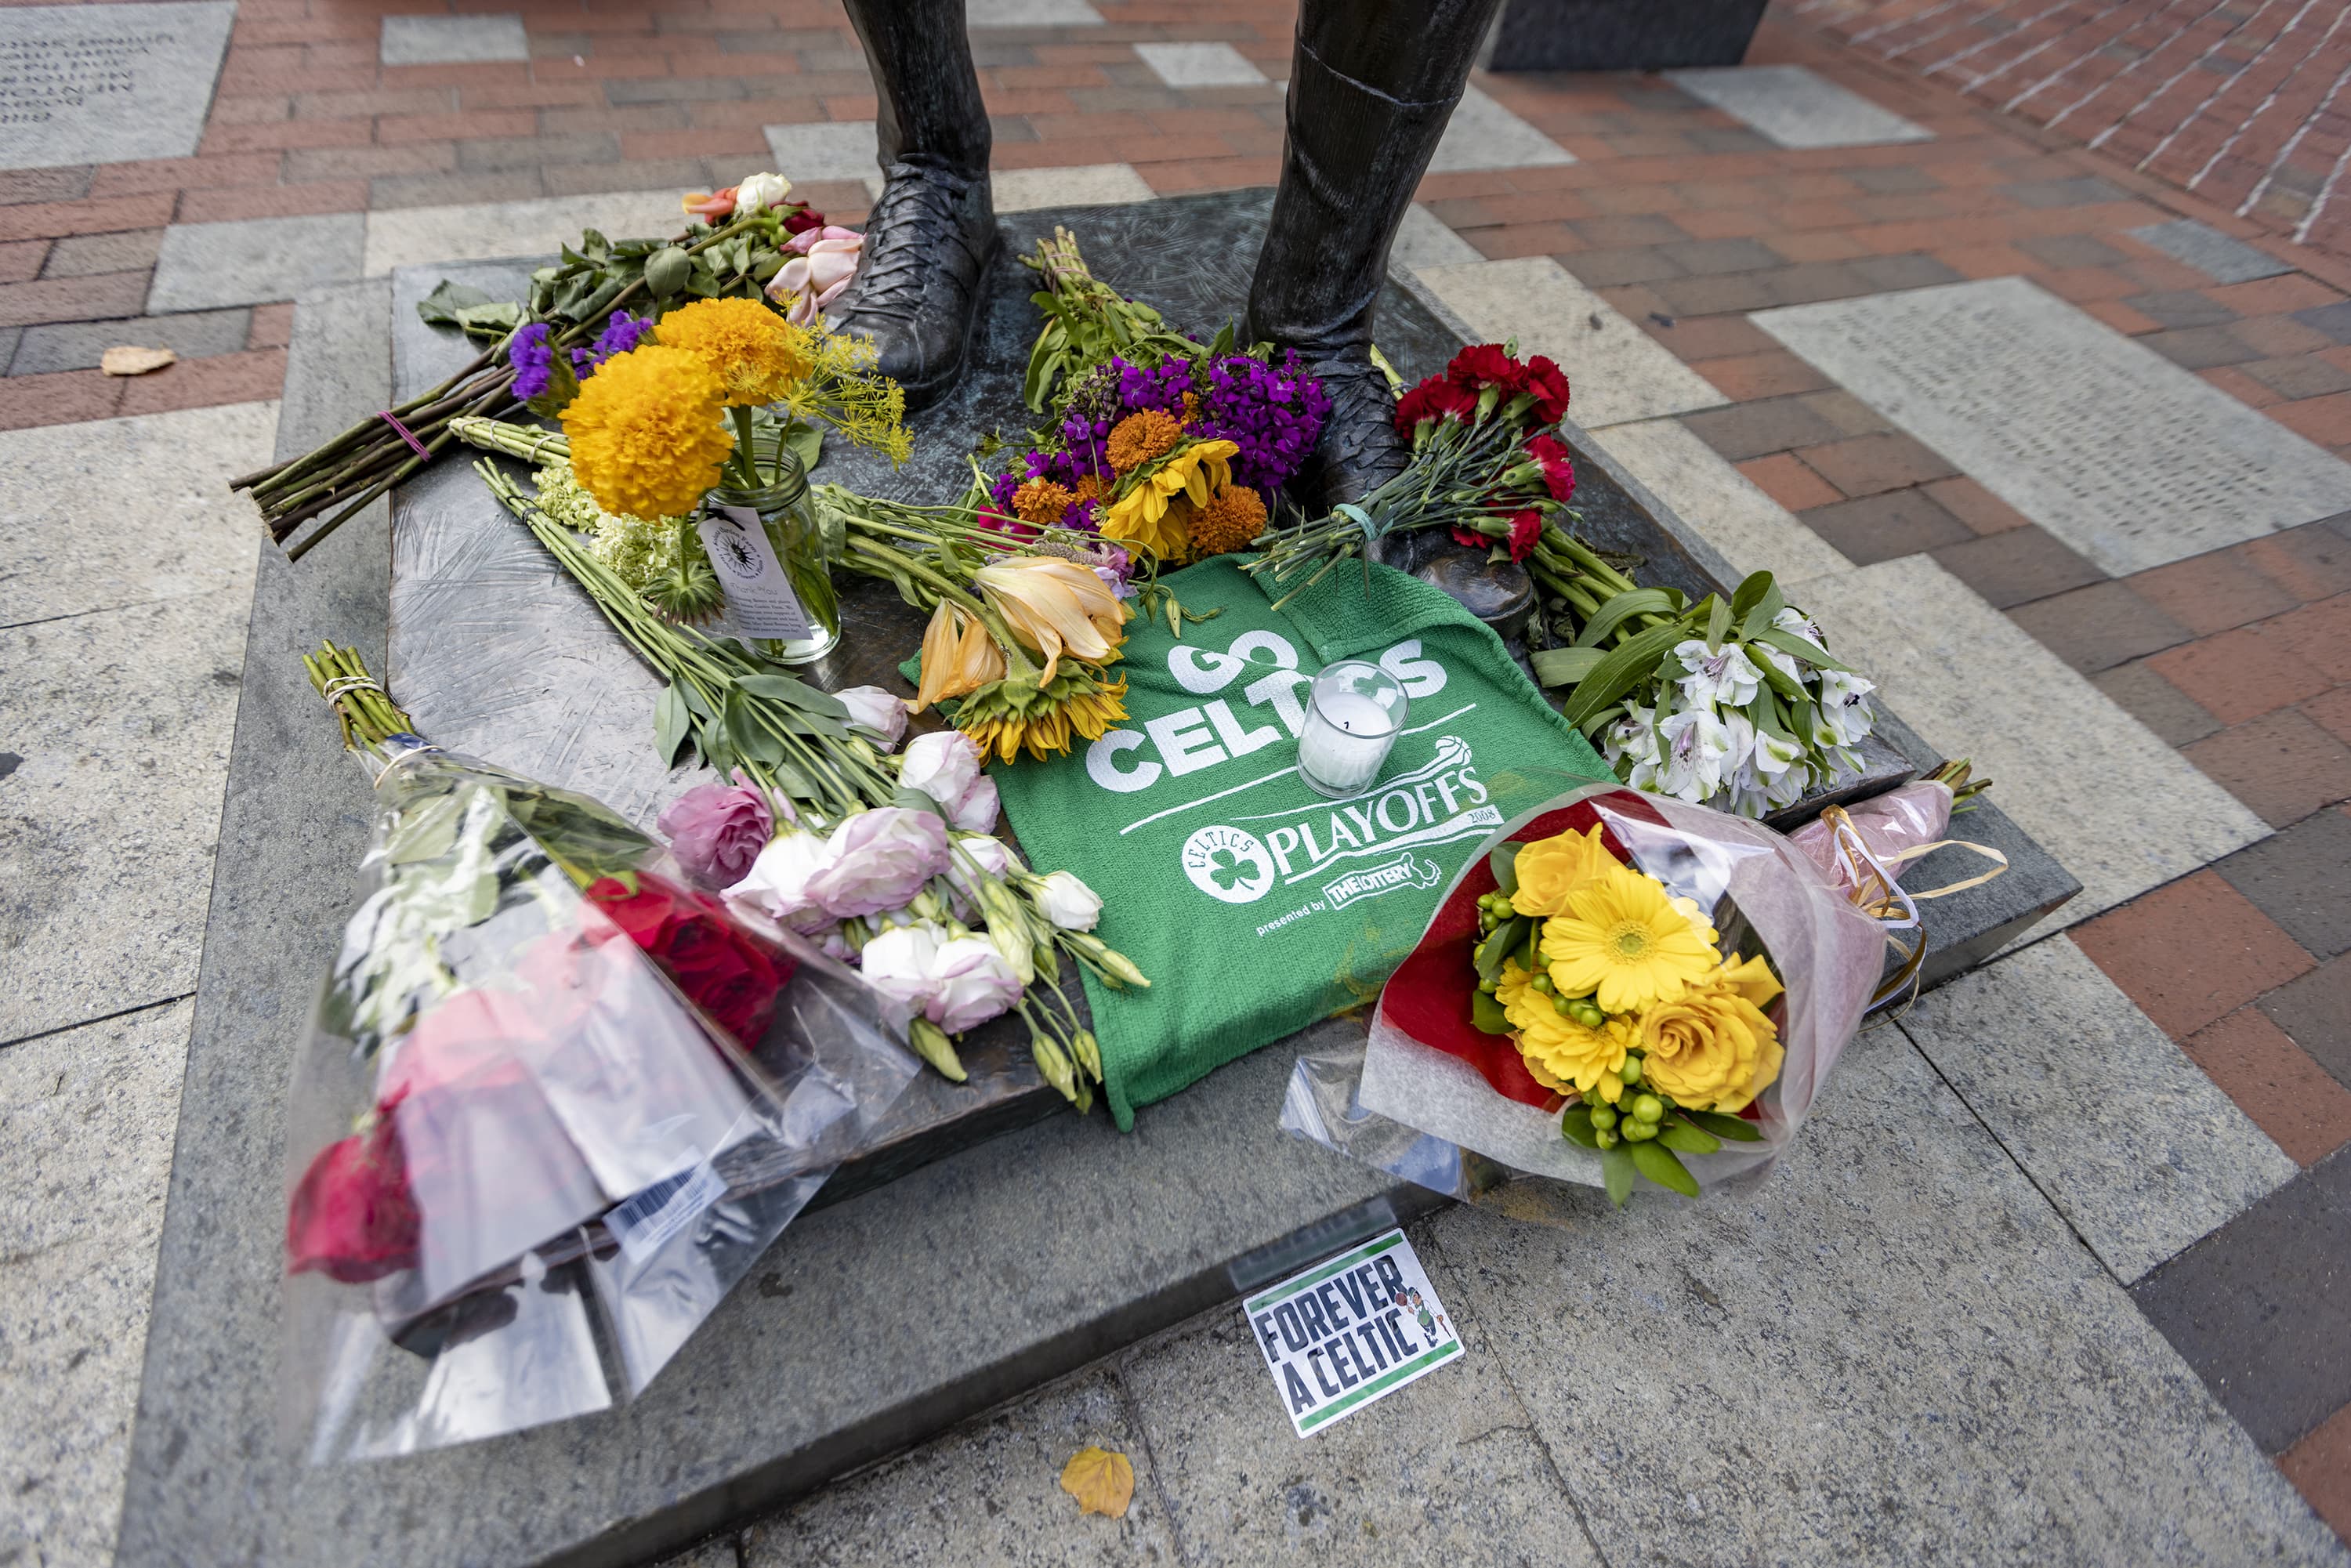 Flowers and tributes at the feet of the Bill Russell statue on Boston's City Hall Plaza. (Jesse Costa/WBUR)